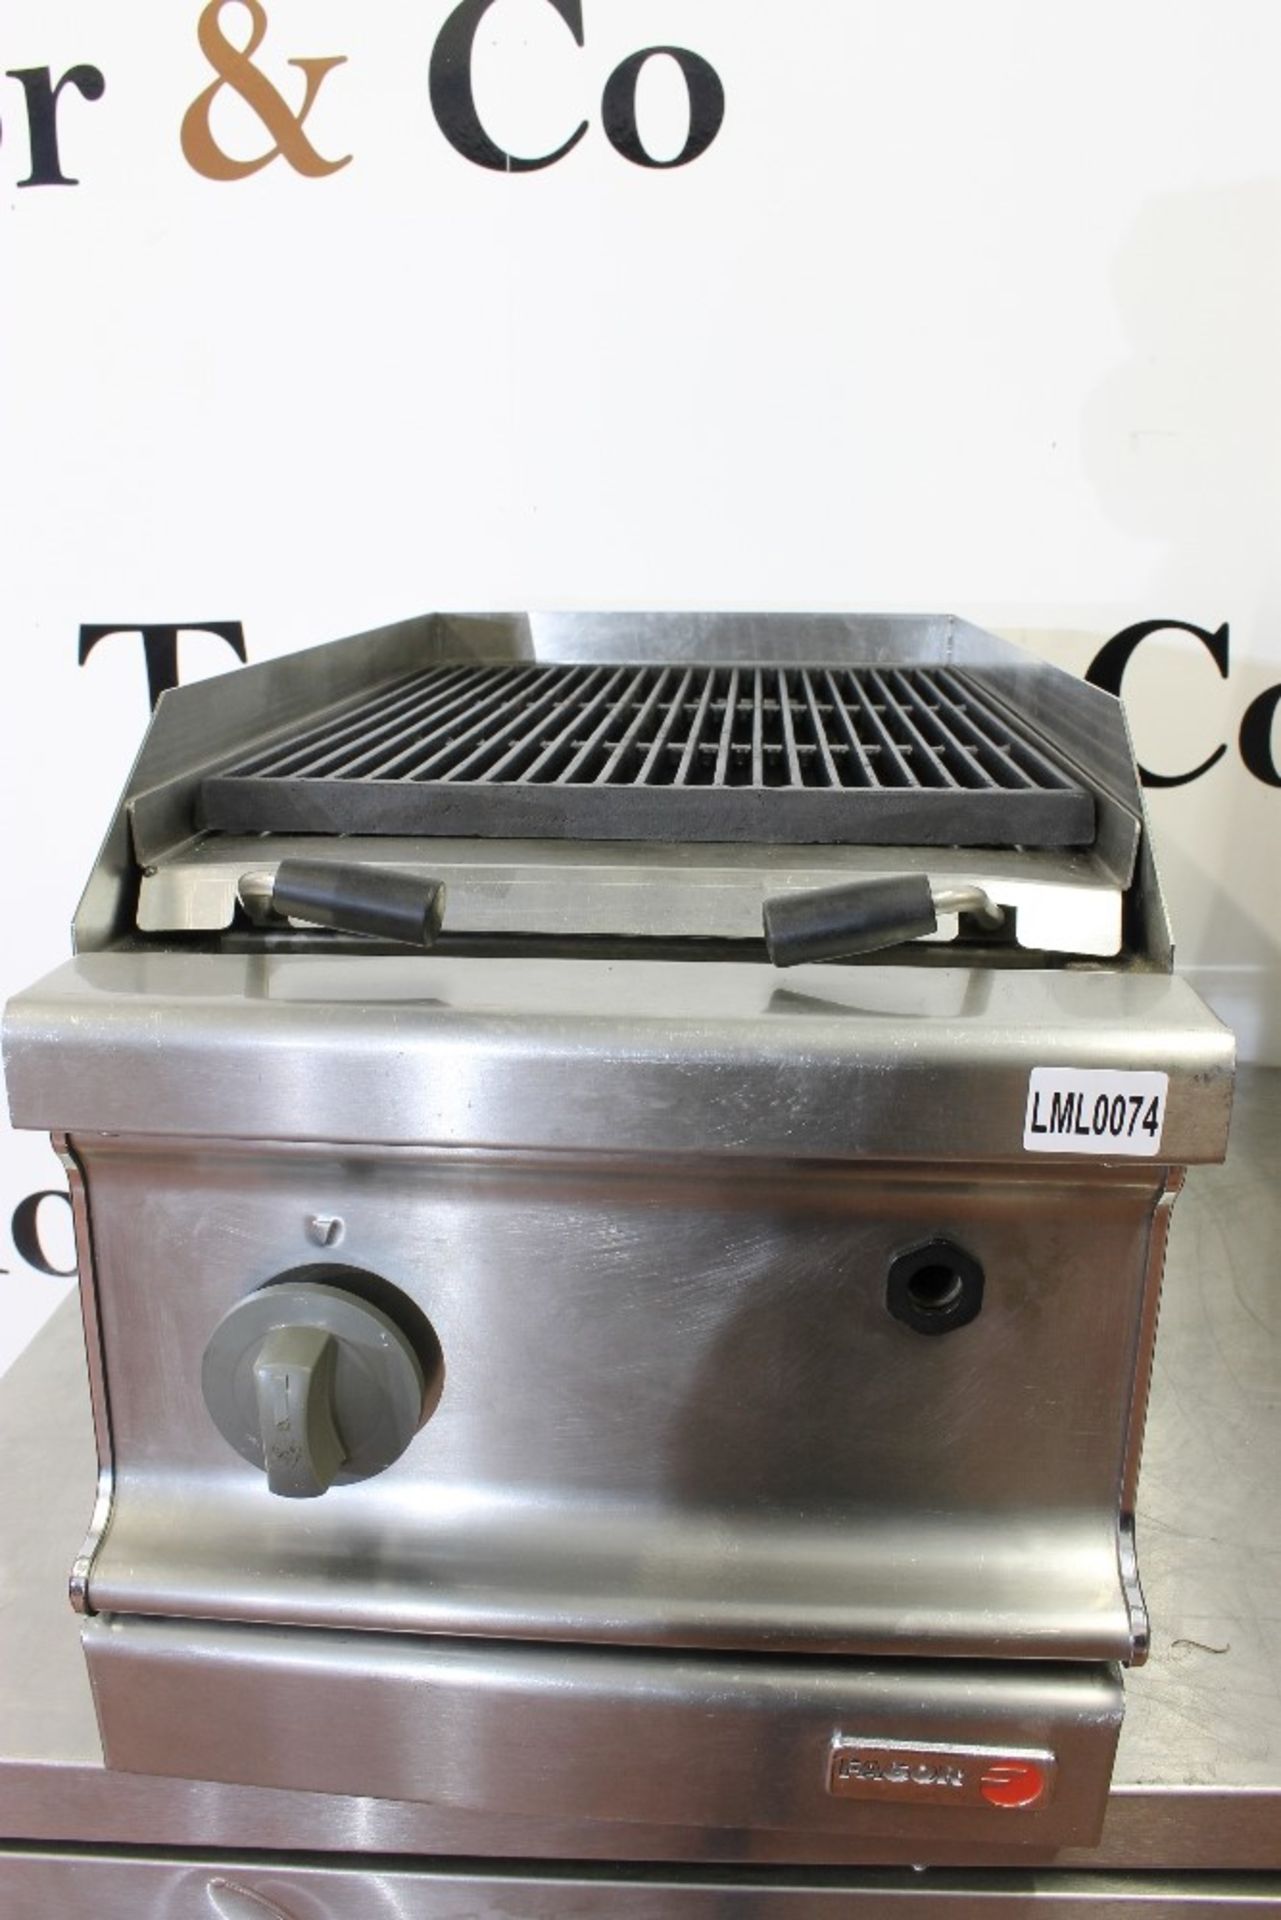 Table Top Chargrill – Nat Gas - Image 2 of 4